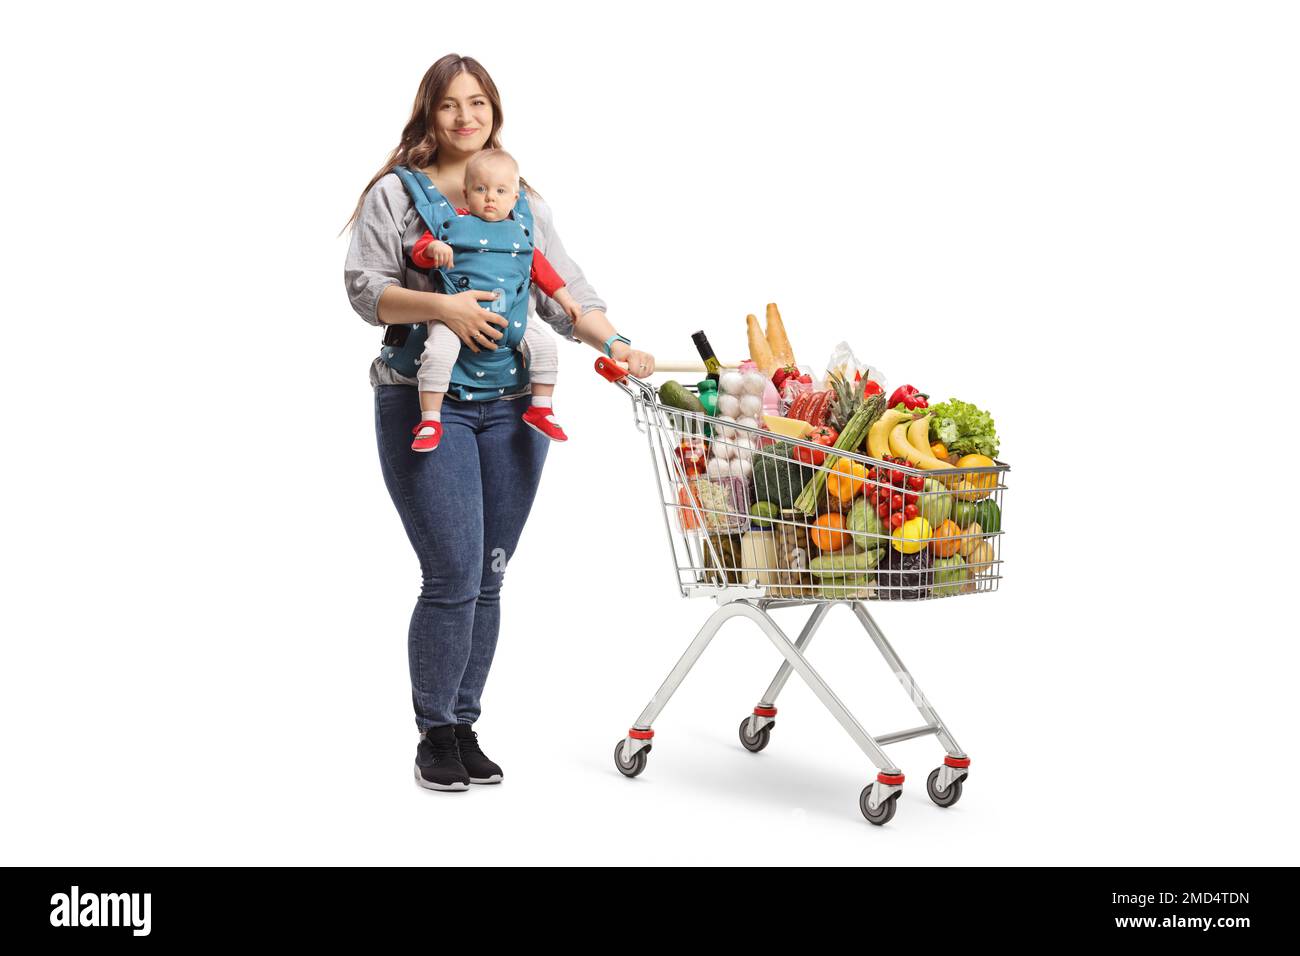 Mother with a baby in a carrier and a shopping cart full of food isolated on white background Stock Photo